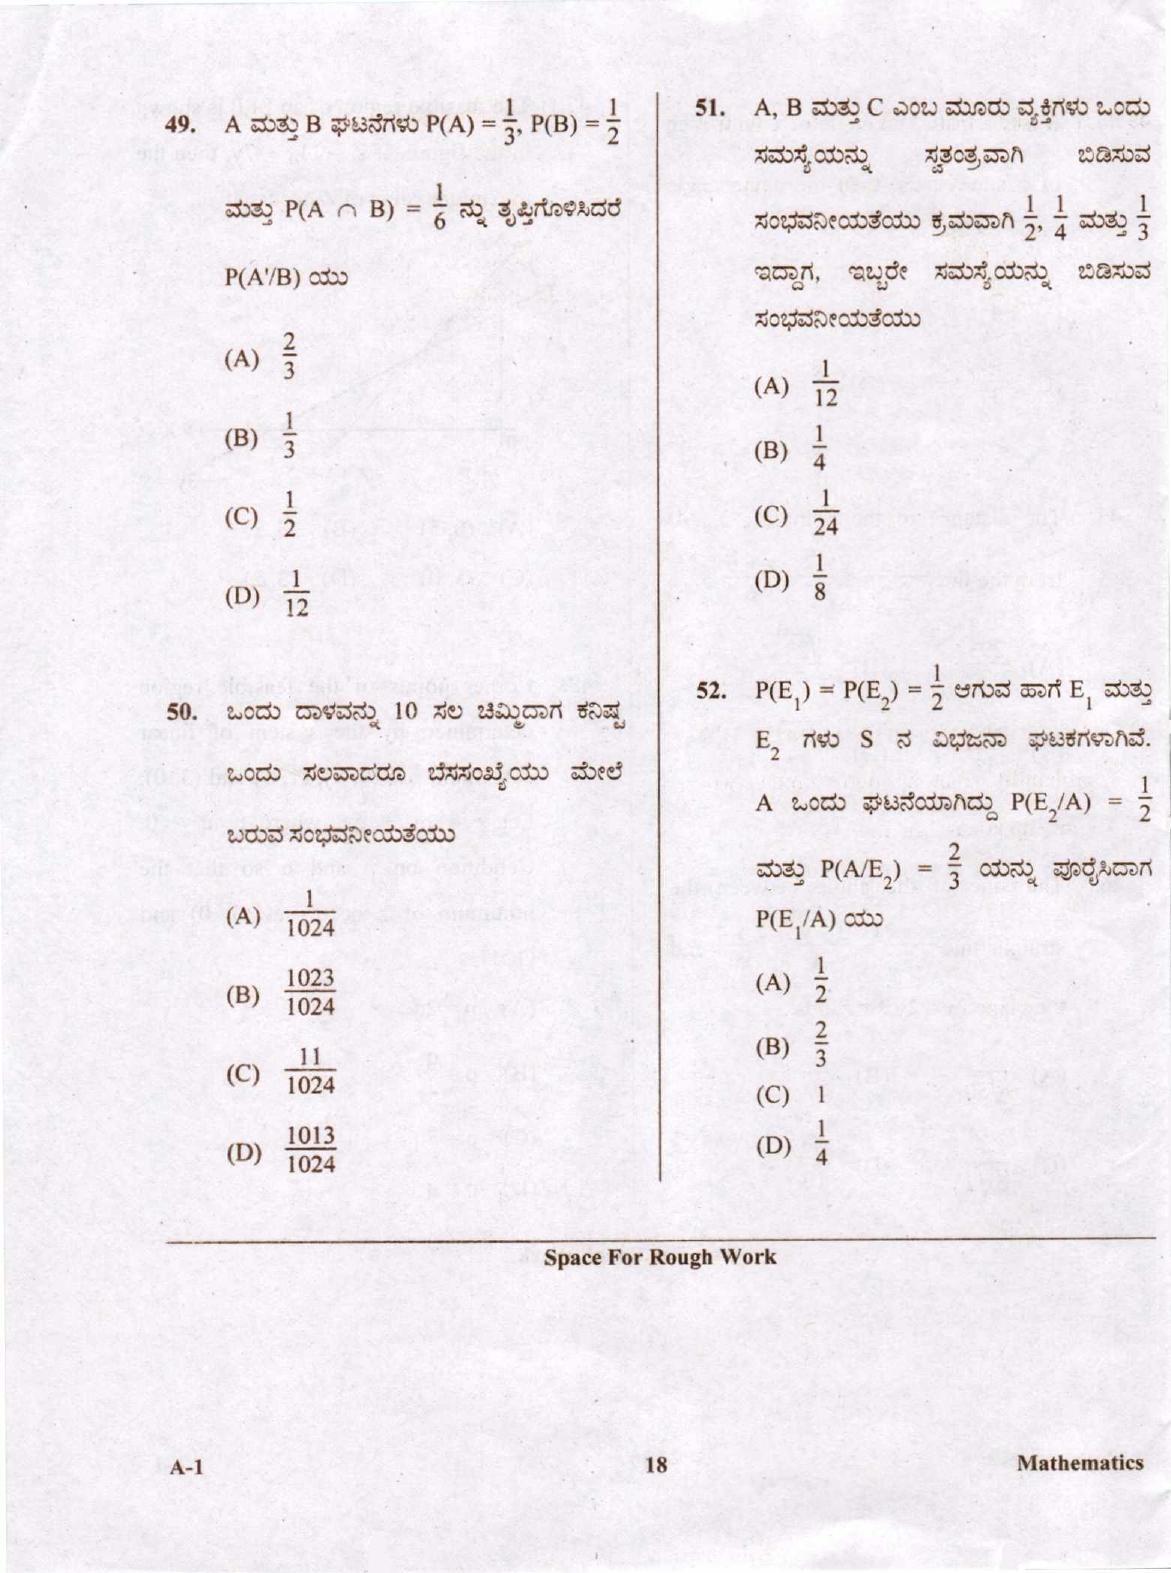 KCET Mathematics 2020 Question Papers - Page 18